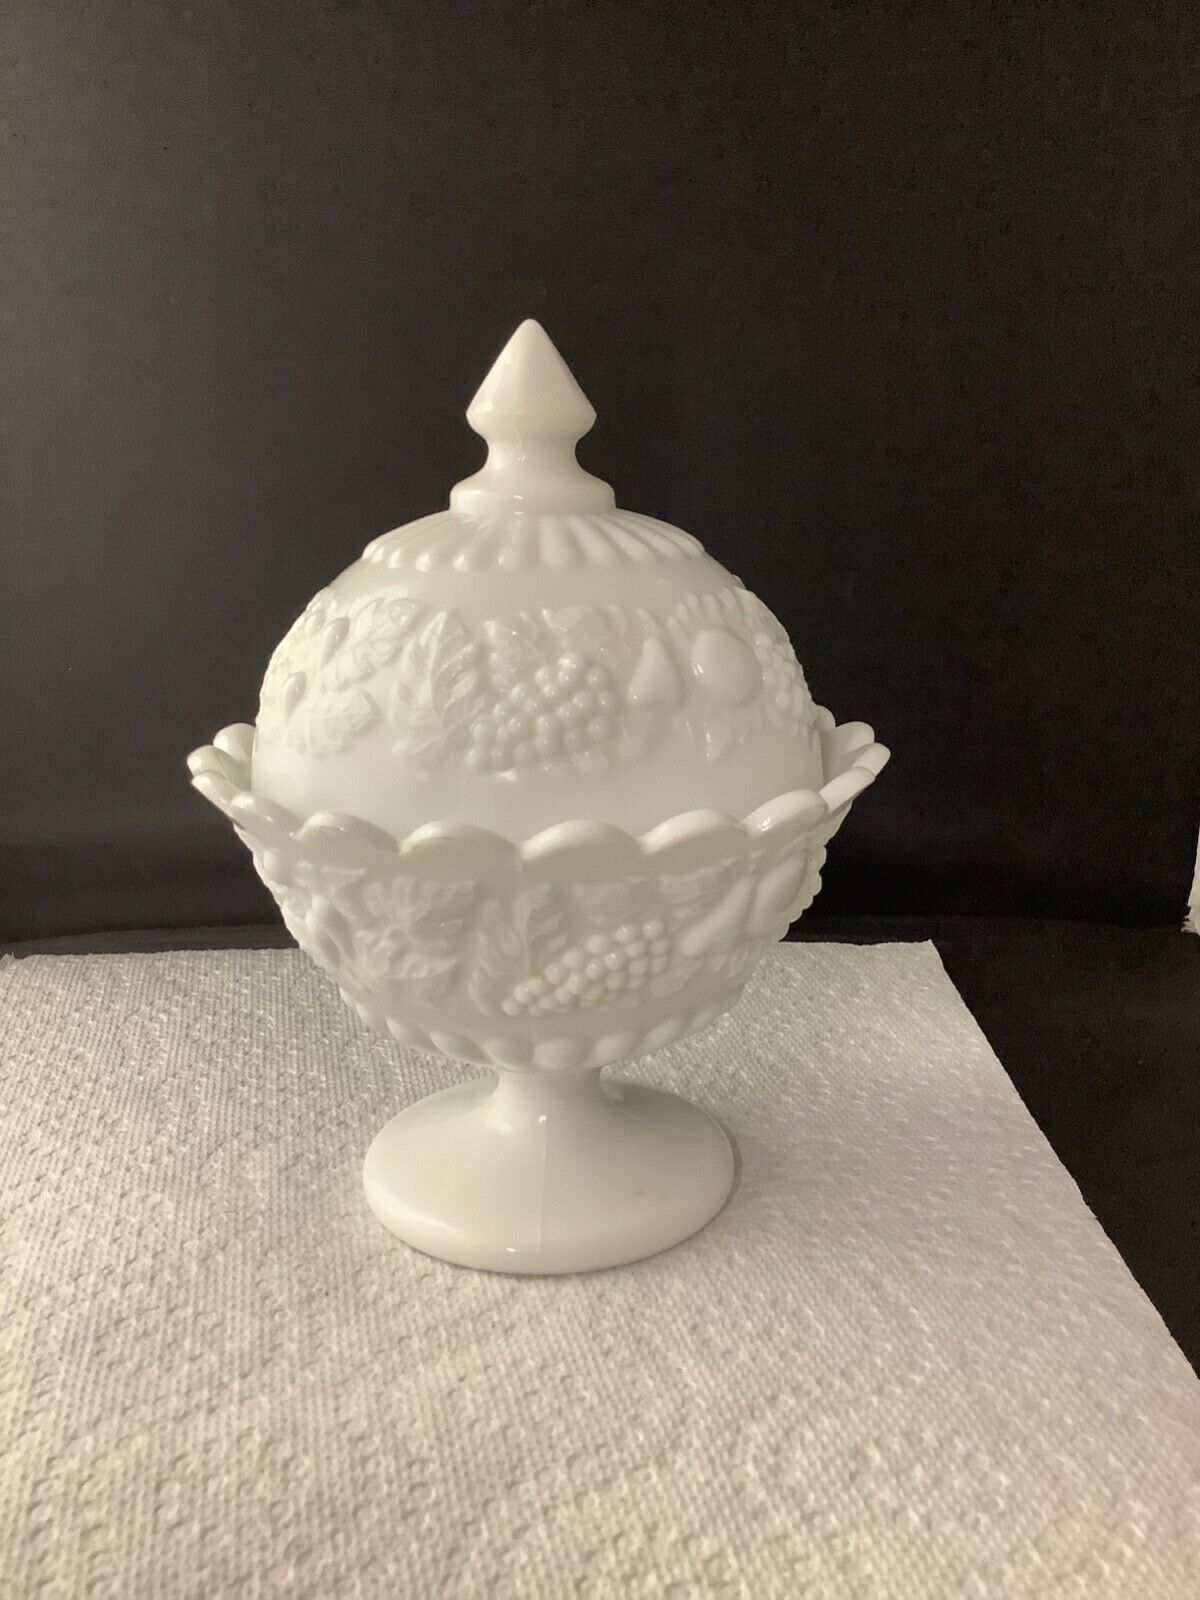 Westmoreland Vintage Covered Candy Dish Grape And Fruit Design Milk Glass